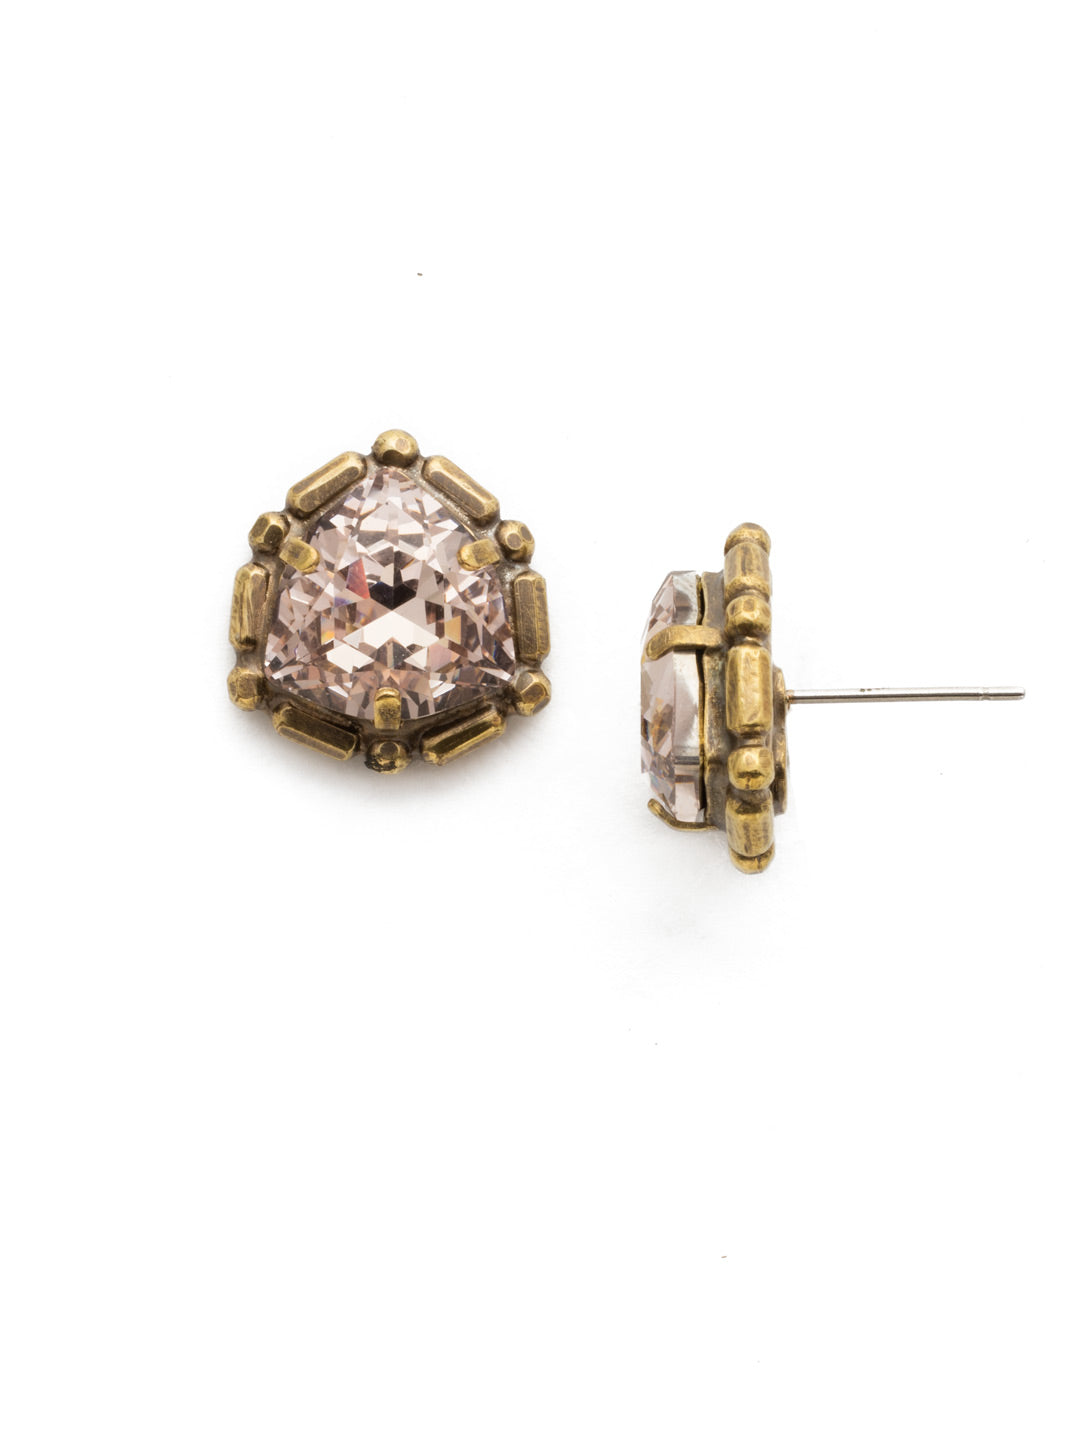 Primula Earring - EDX8AGSTN - <p>A shield shaped crystal in a detailed metal setting. Perfect if you want to add just a bit of sparkle to any outfit! From Sorrelli's Sandstone collection in our Antique Gold-tone finish.</p>